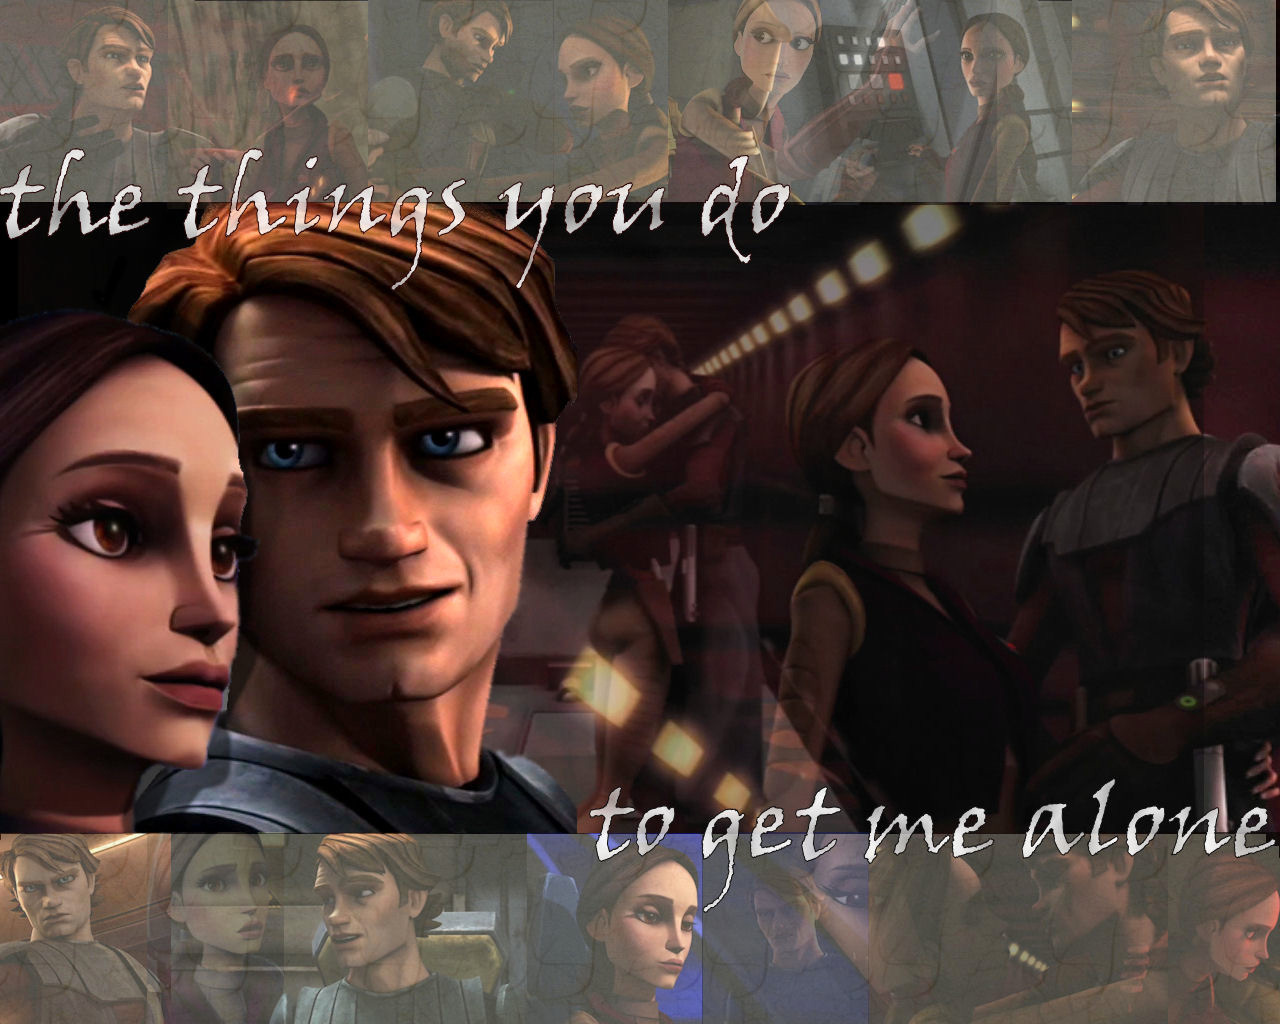 Clone Wars Anakin And Padm Image Oh The Things You Do To Get Me